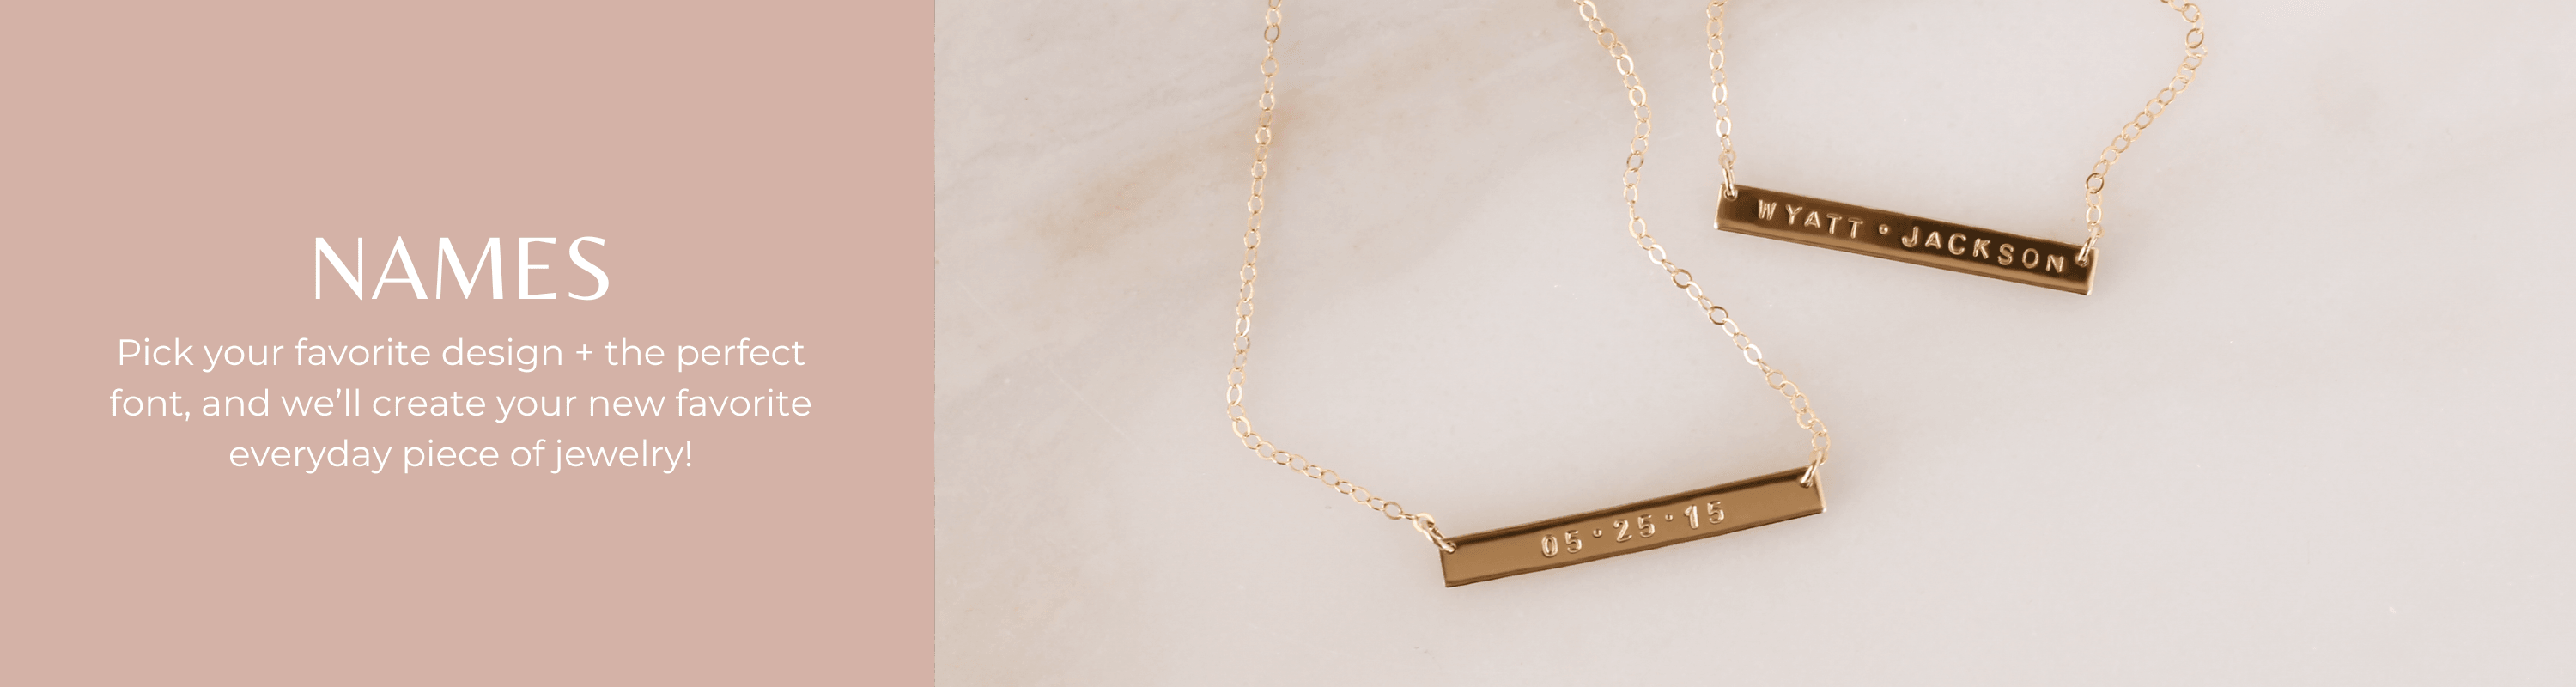 Names - Nolia Jewelry - Meaningful + Sustainably Handcrafted Jewelry